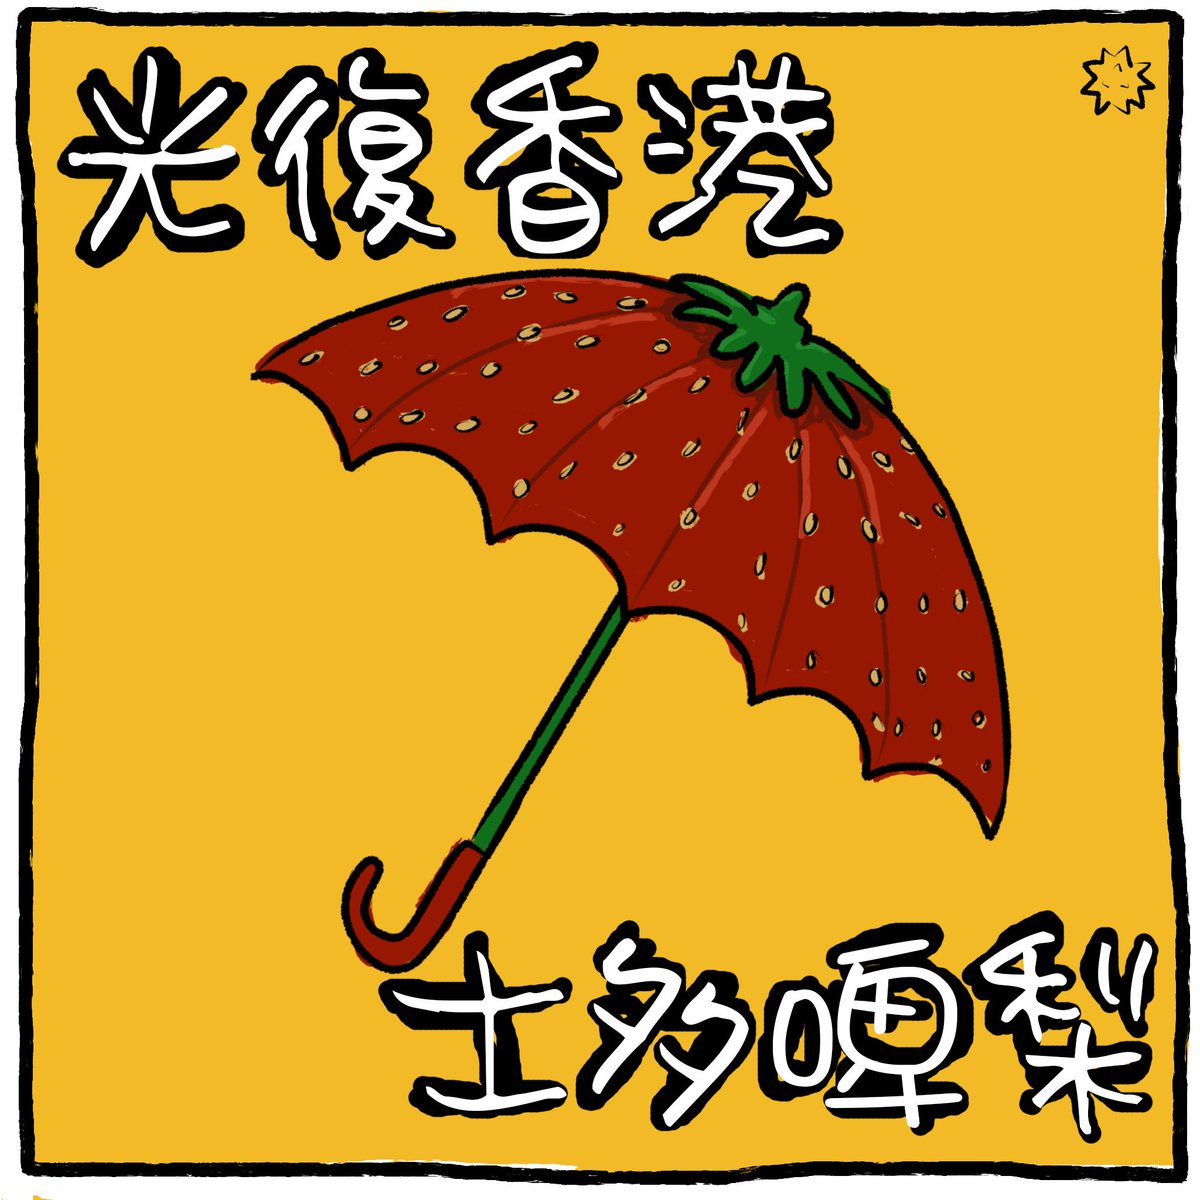 Overheard a small child trying to get "Gwong fuk heung gong, si doi gaak ming" slogan right but they got it a bit confused. They said "si do bei lei" at the end instead. Too cute! So I had to draw it.  #HongKongProtests  #HKProtestArt